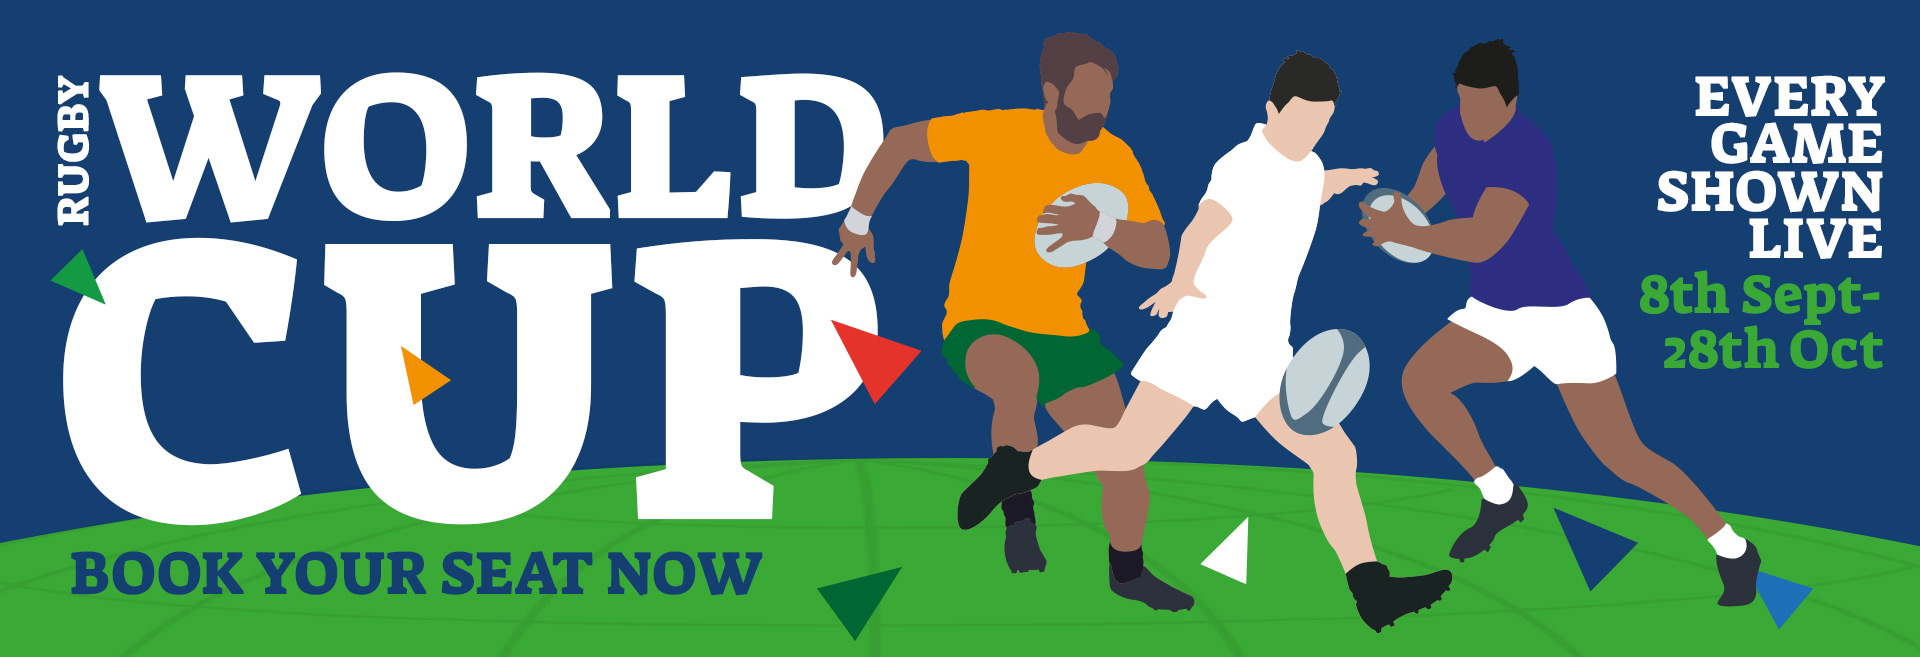 Watch the Rugby World Cup at The Island Queen